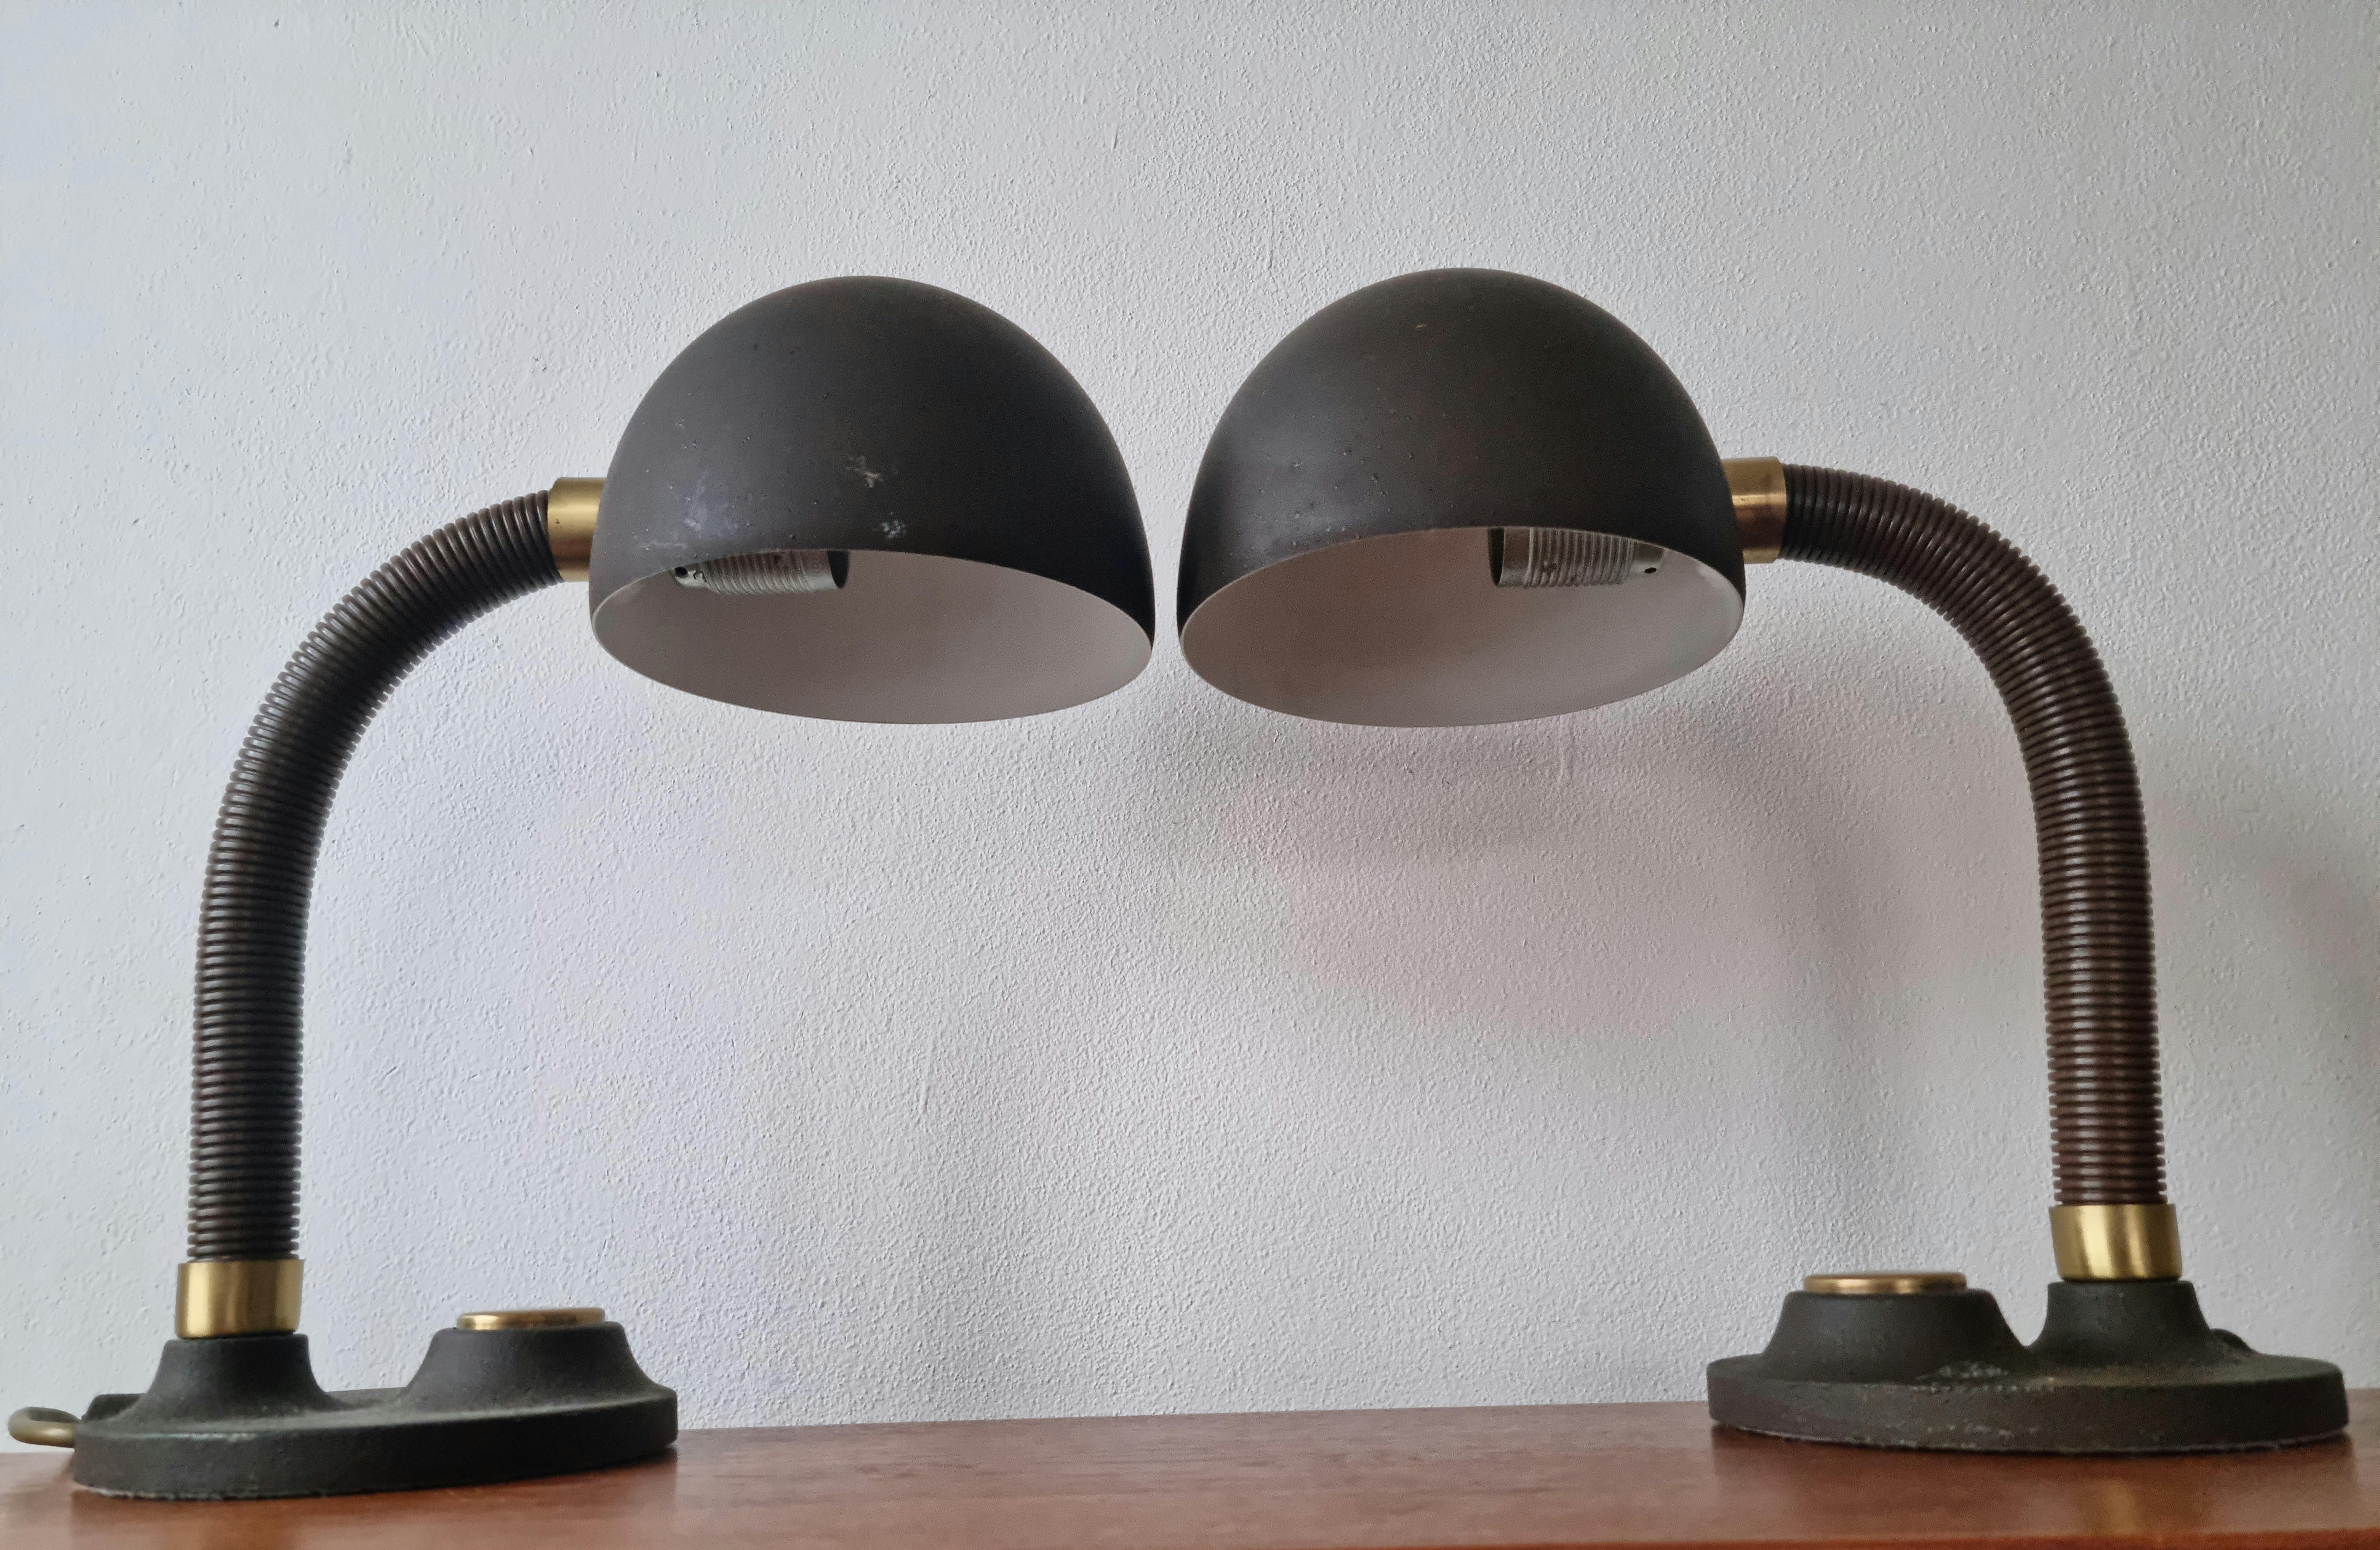 Pair of Midcentury Table Lamps Hillebrand, Germany, 1970s For Sale 2